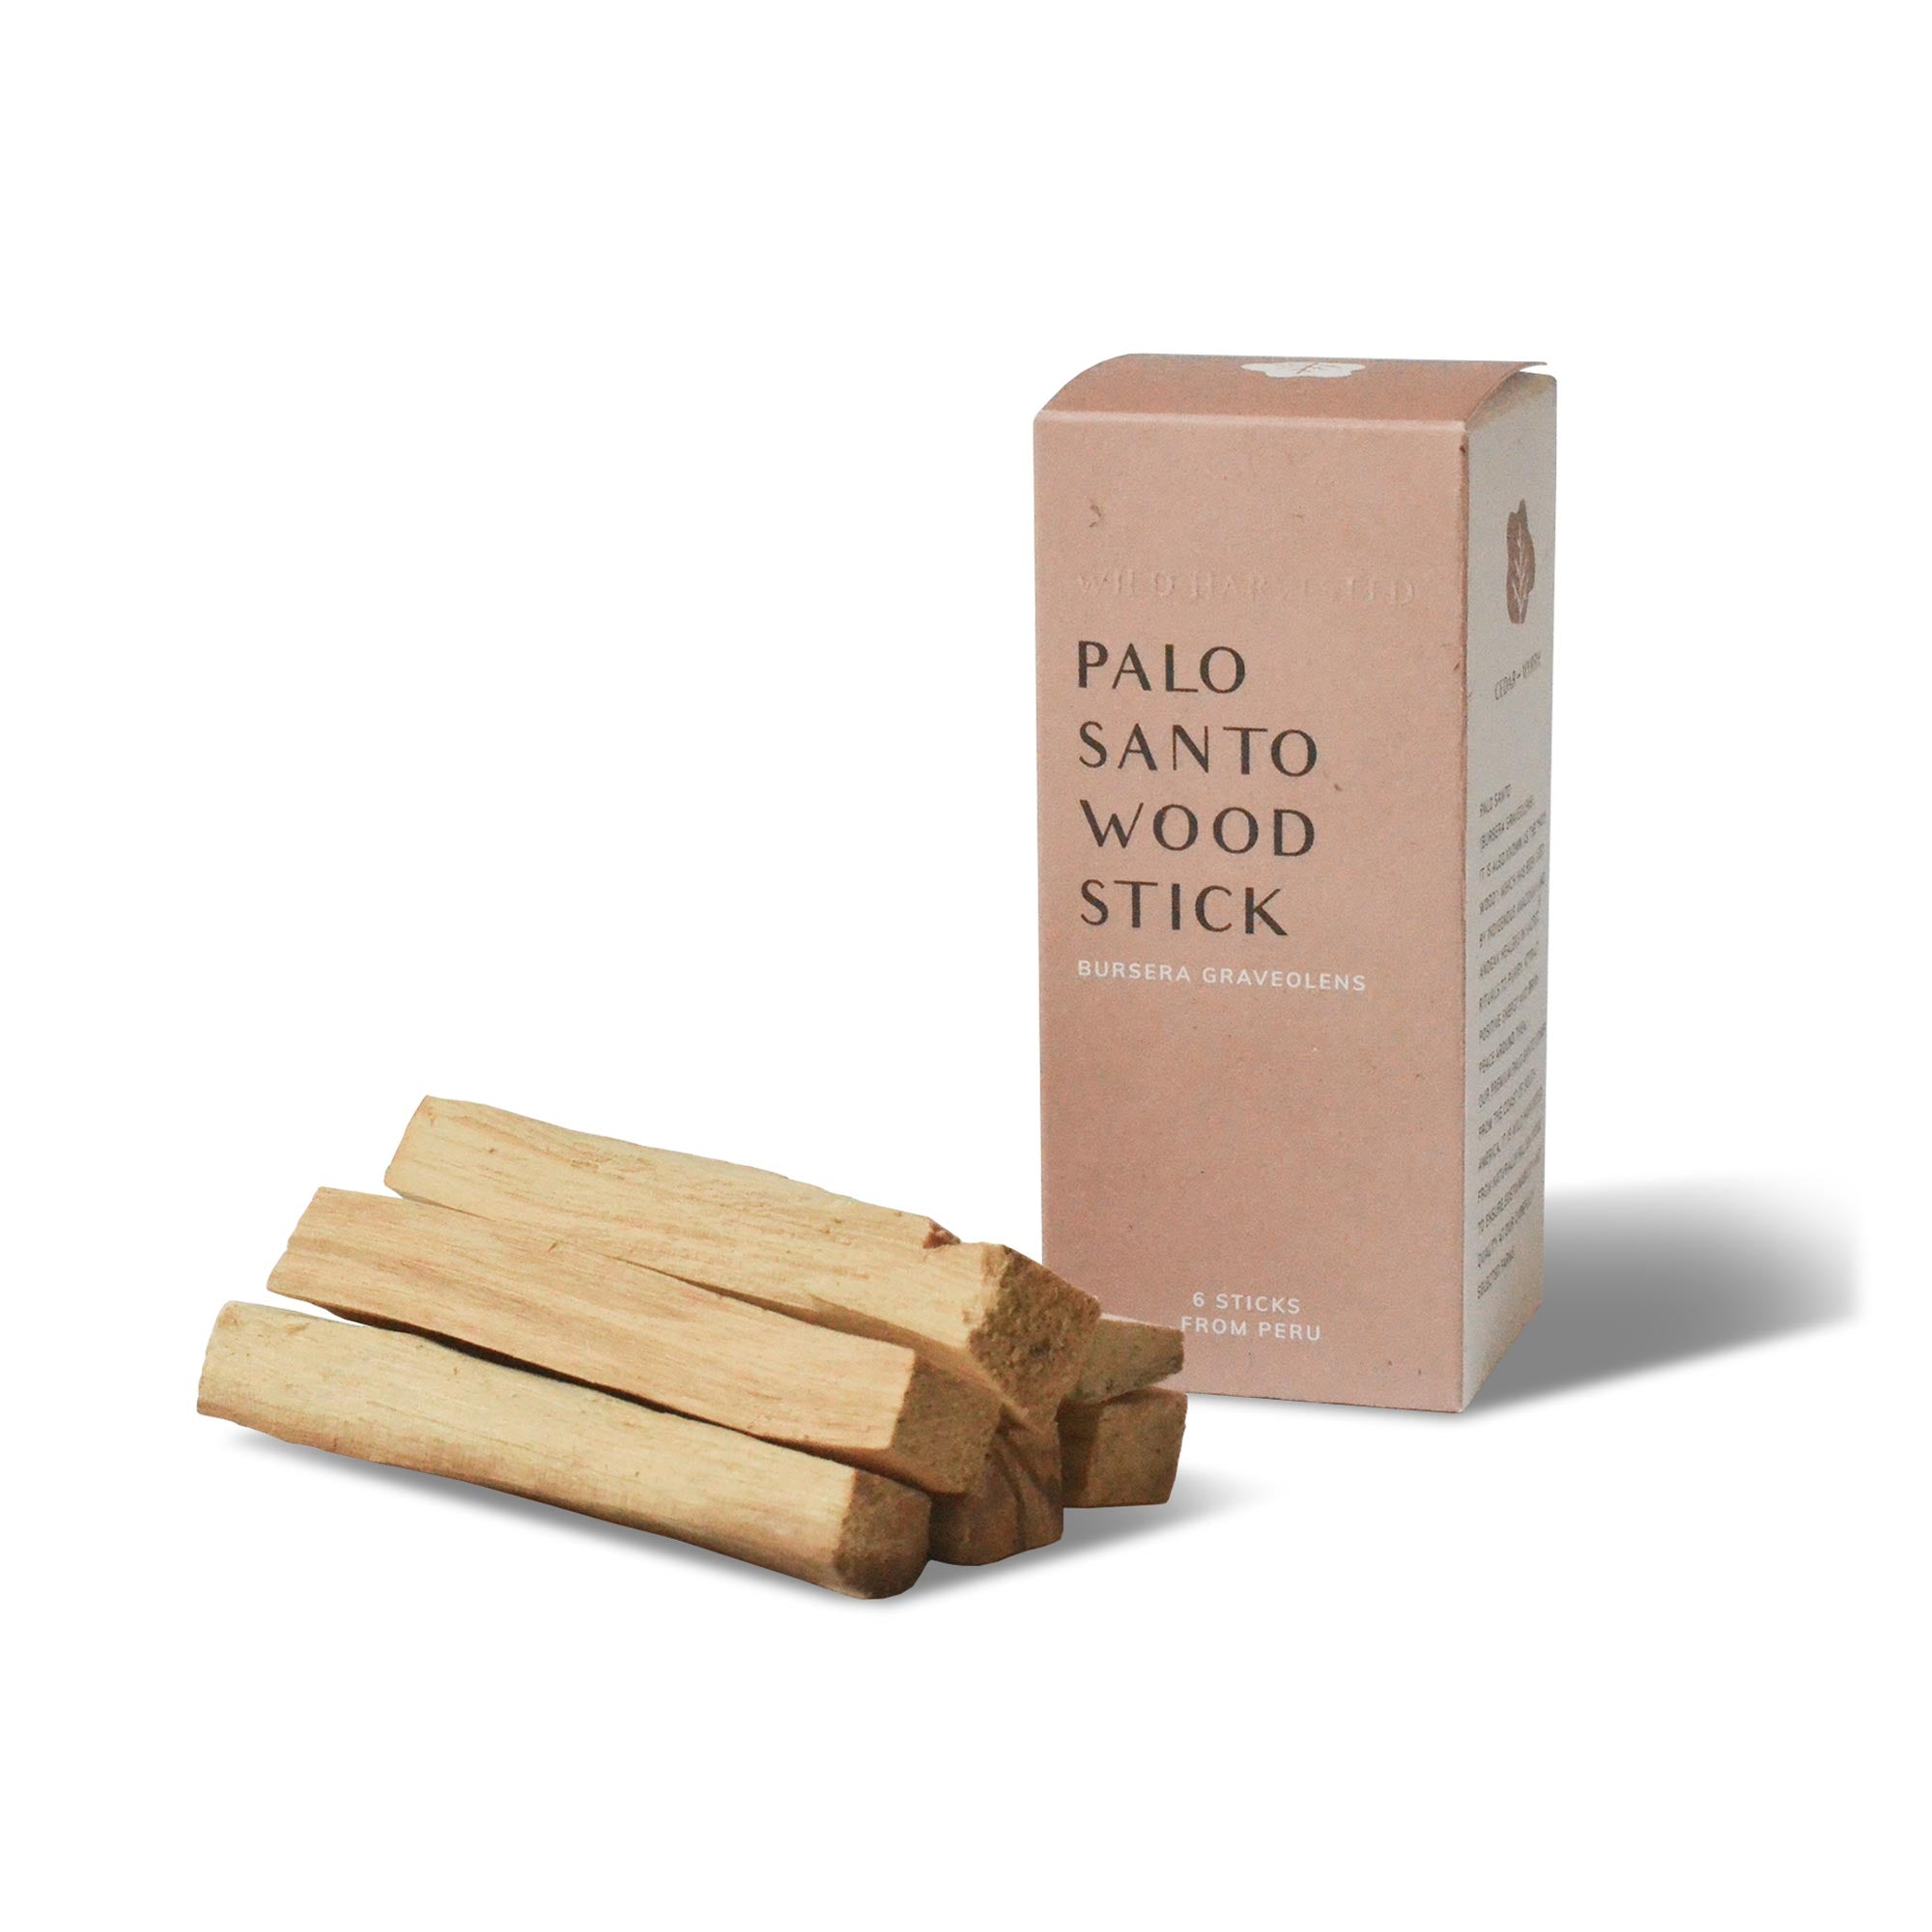 Palo Santo Wood Sticks from Peru and the package